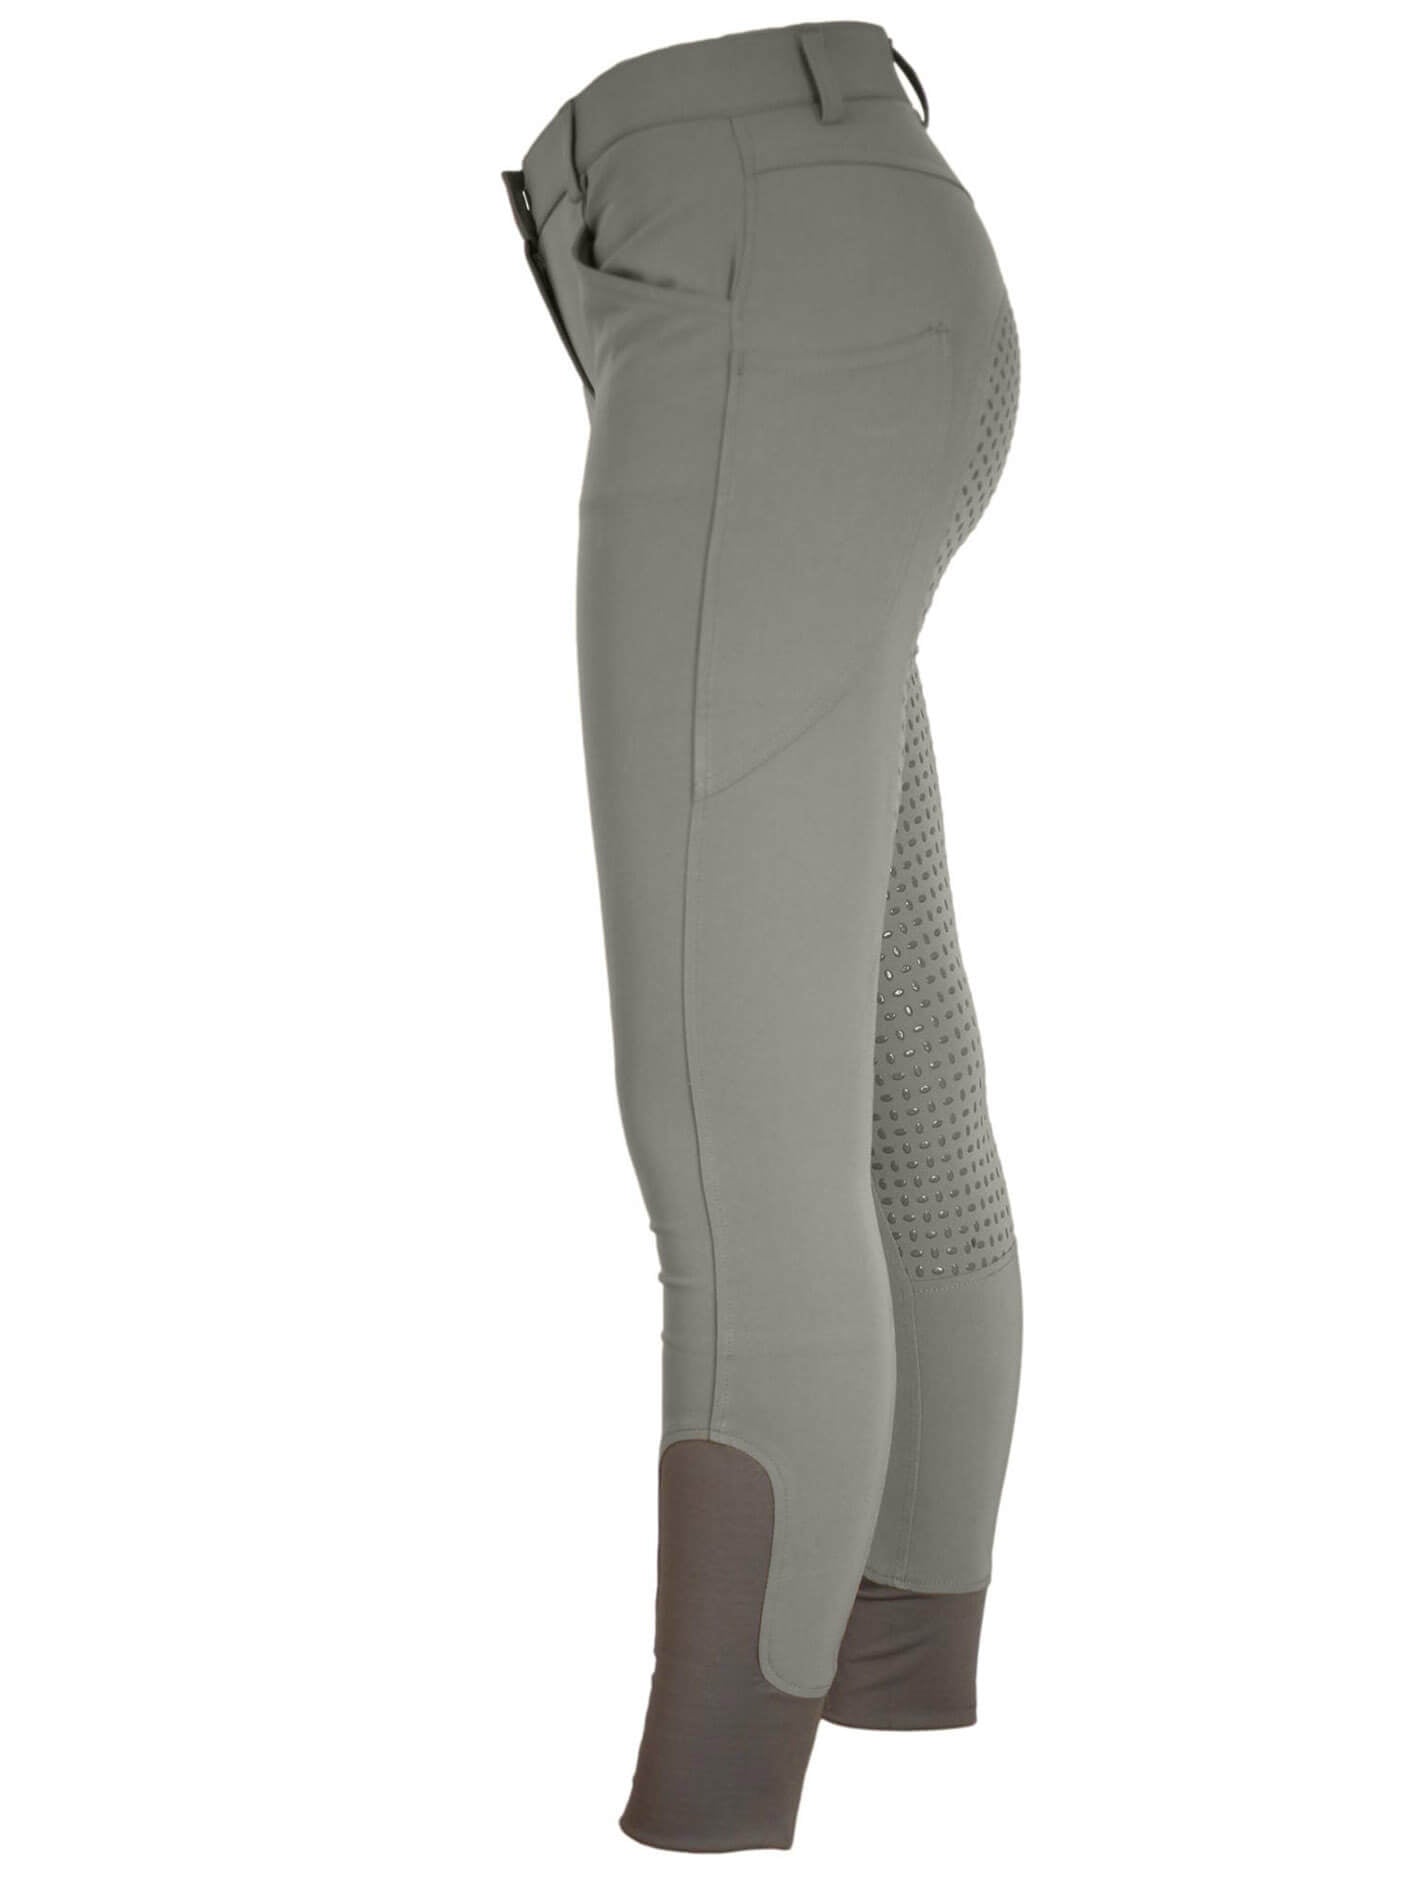 CoolMax Grey Breeches with phone pockets-Plum Tack-The Equestrian